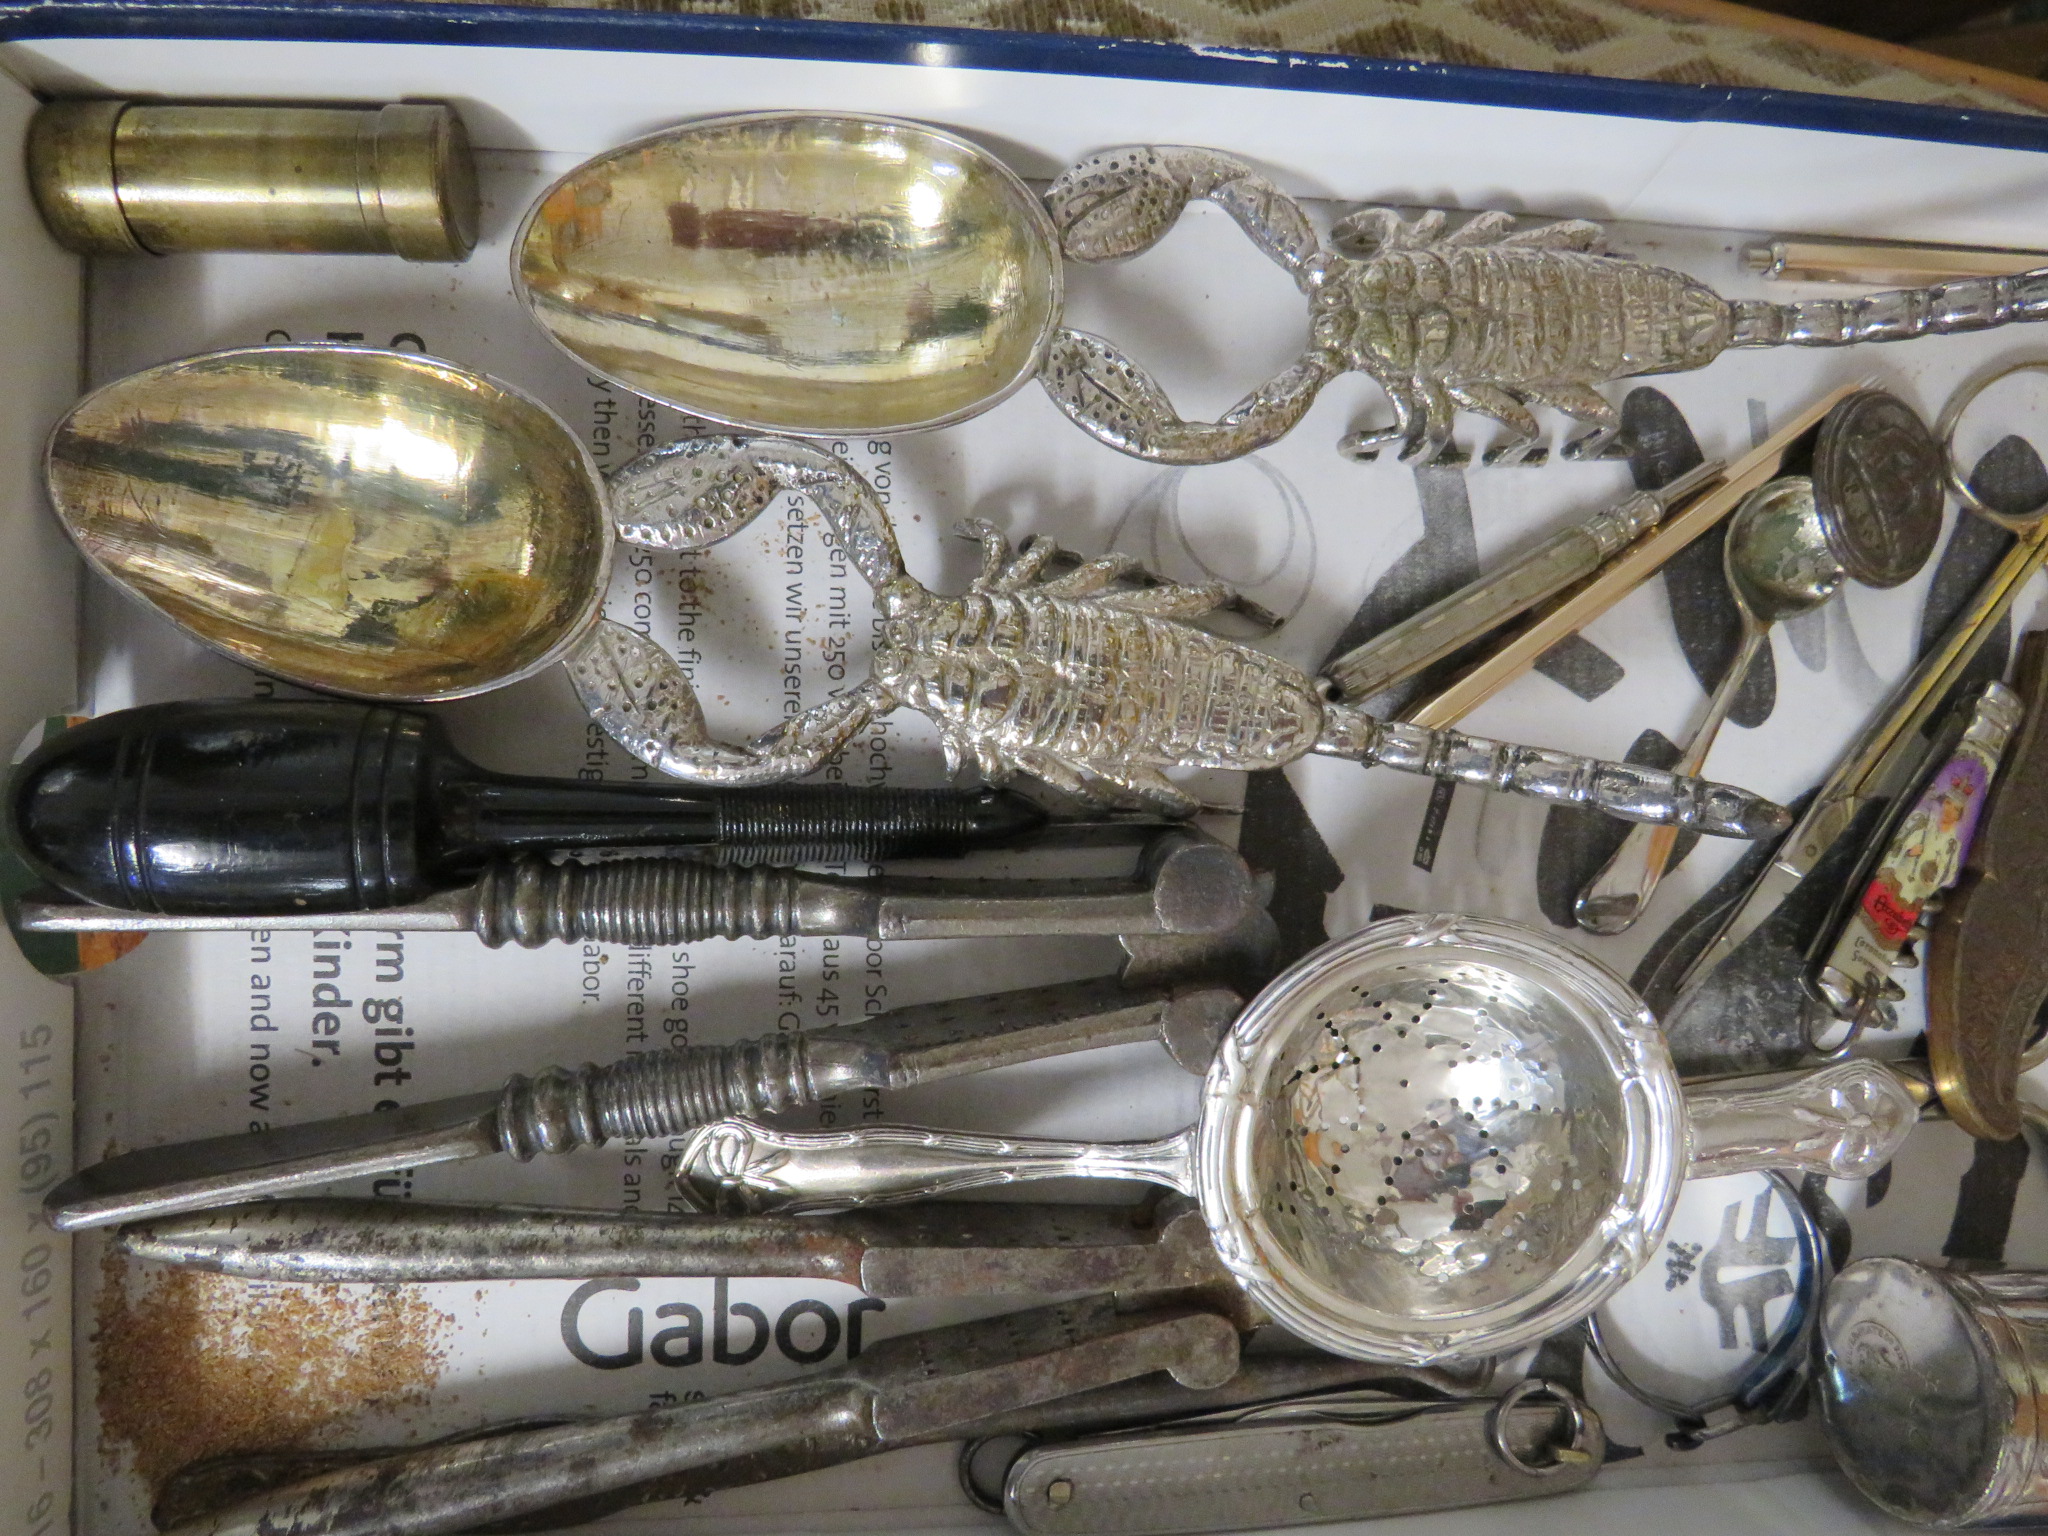 TRAY OF SMALL VINTAGE ITEMS INCLUDING WHITE METAL TEA STRAINER, NUT CRACKERS, PENKNIVES, ETC - Image 3 of 3